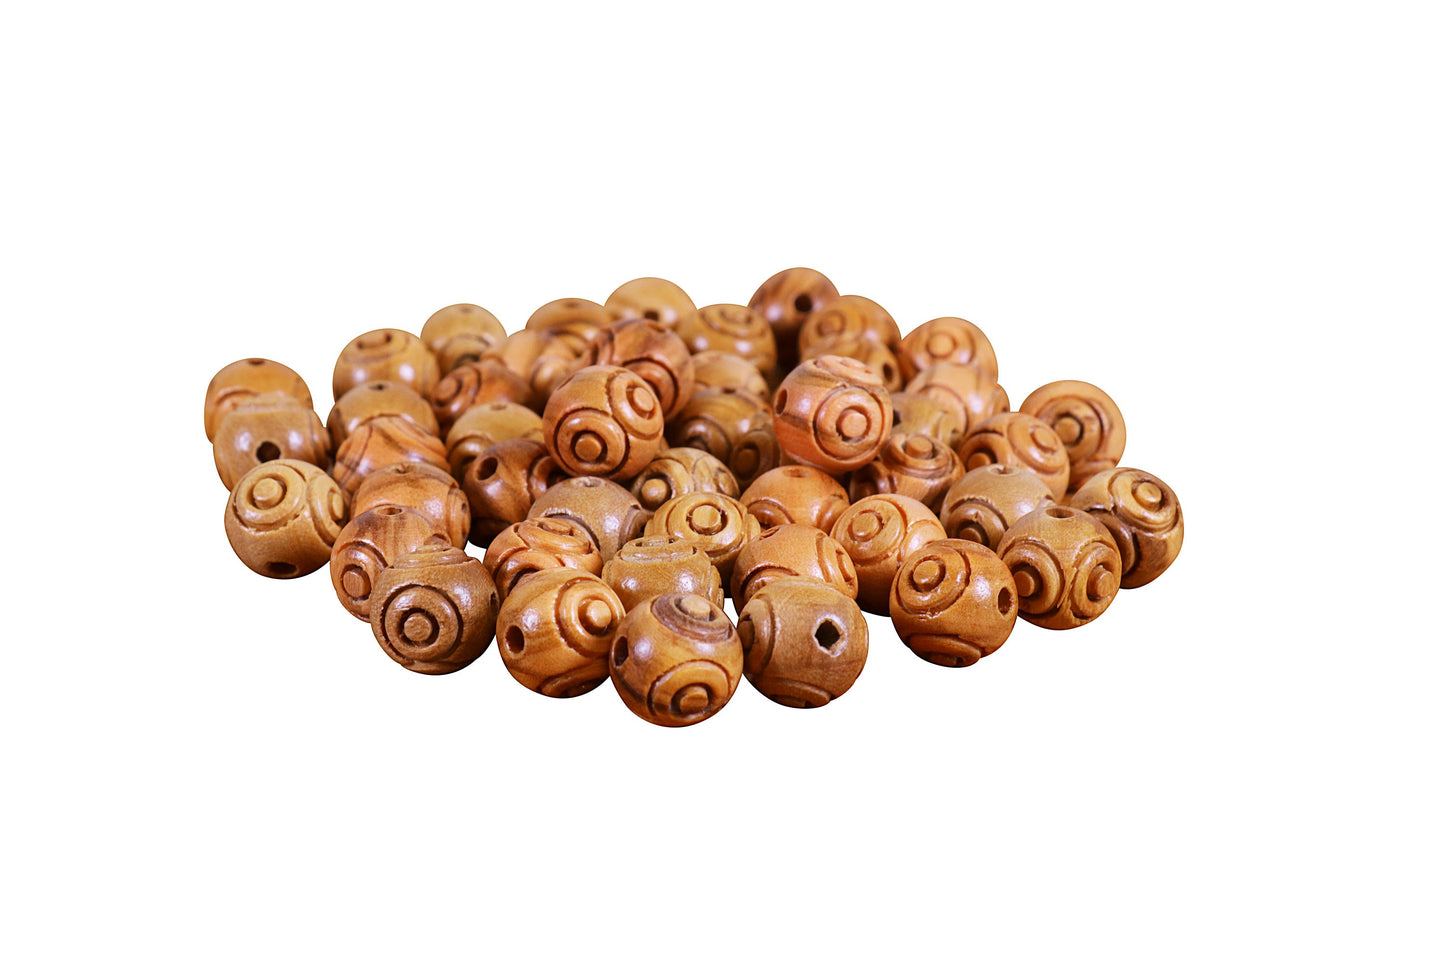 NazarethFairTrade Olive Wood Beads Handcrafted In Galilee - Natural Wooden Engraved Beads From The Holy Land For Crafting and Jewelry Making